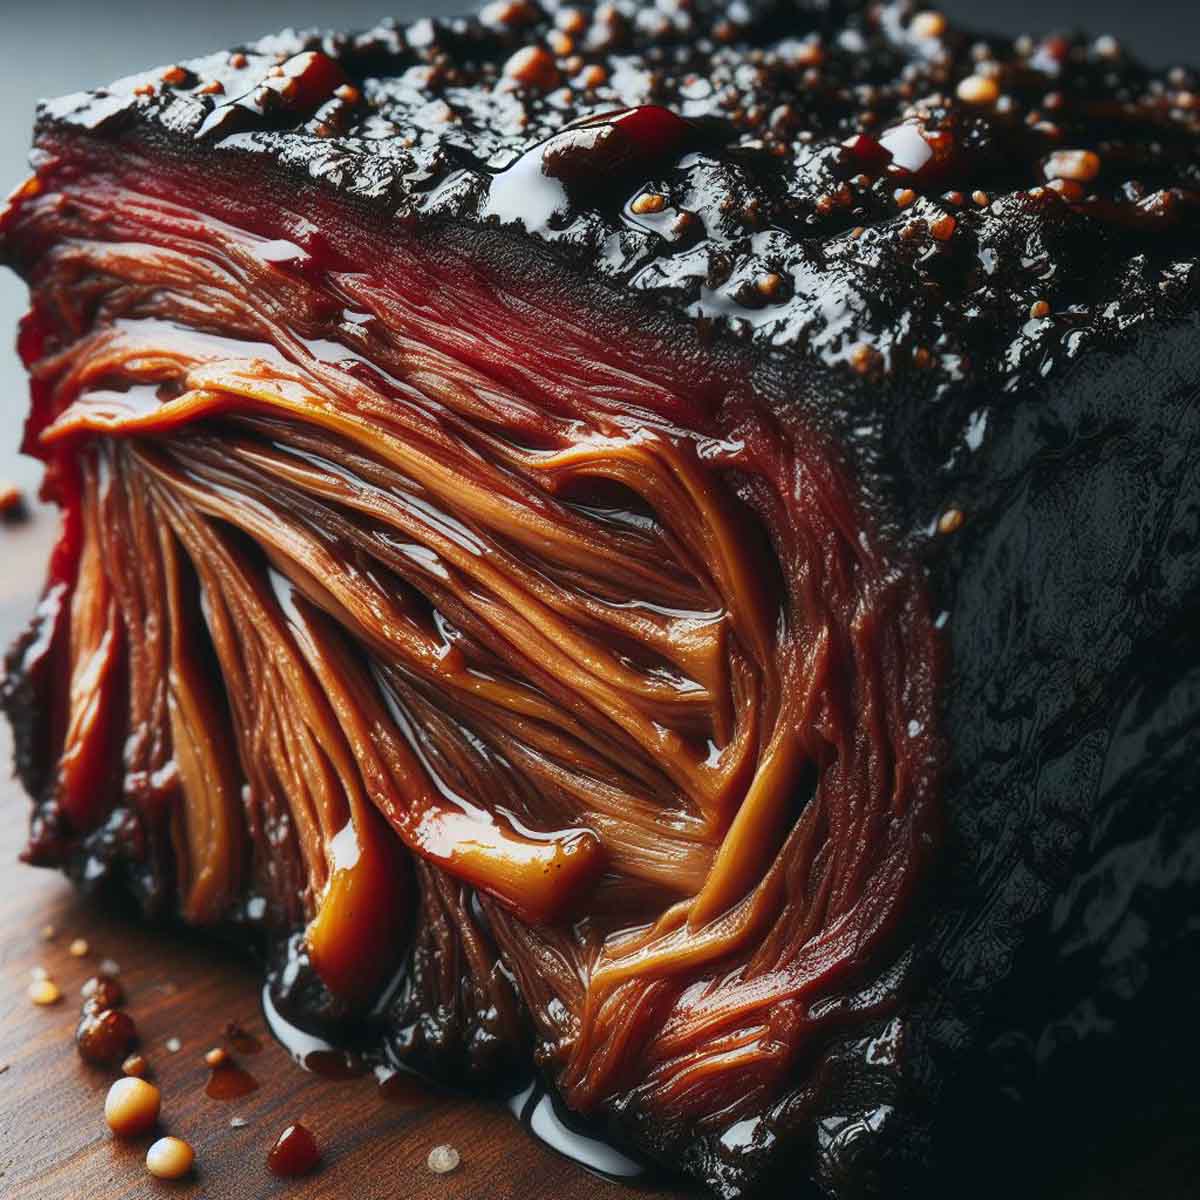 Close-up of slow-cooked short ribs, highlighting the tender, fall-apart texture and rich, glossy sauce.